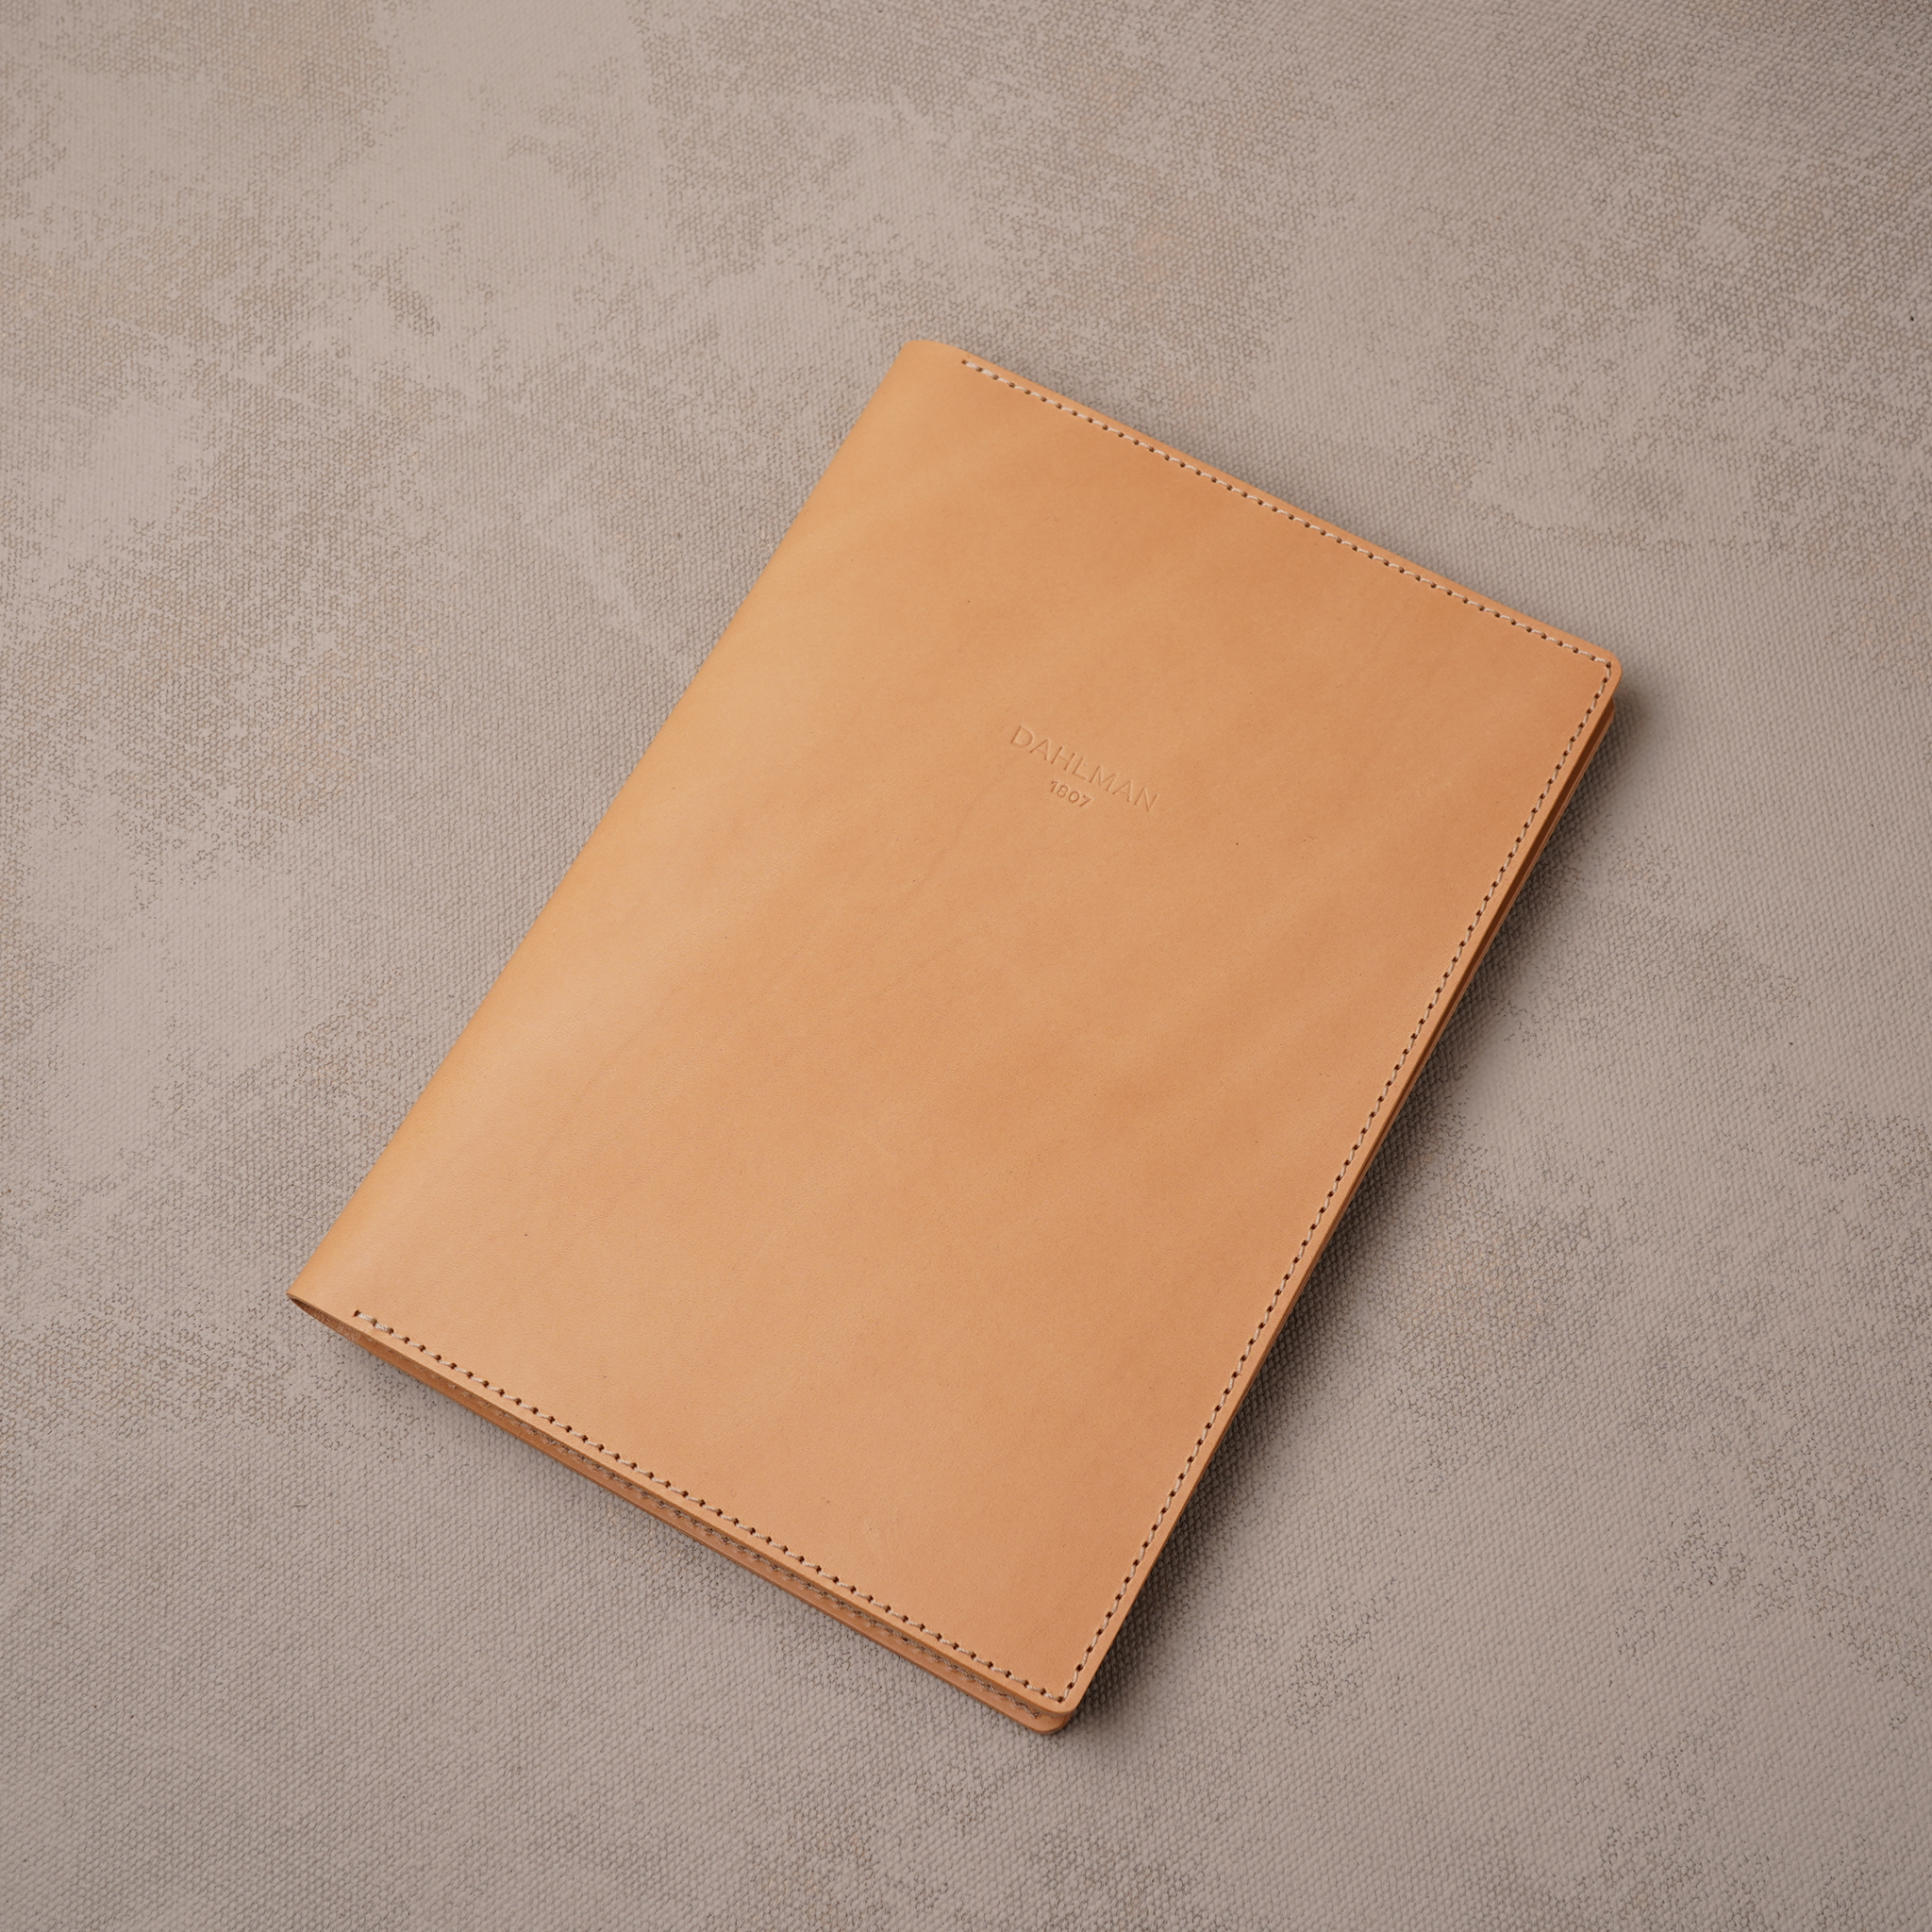 Notebook Cover, Tan